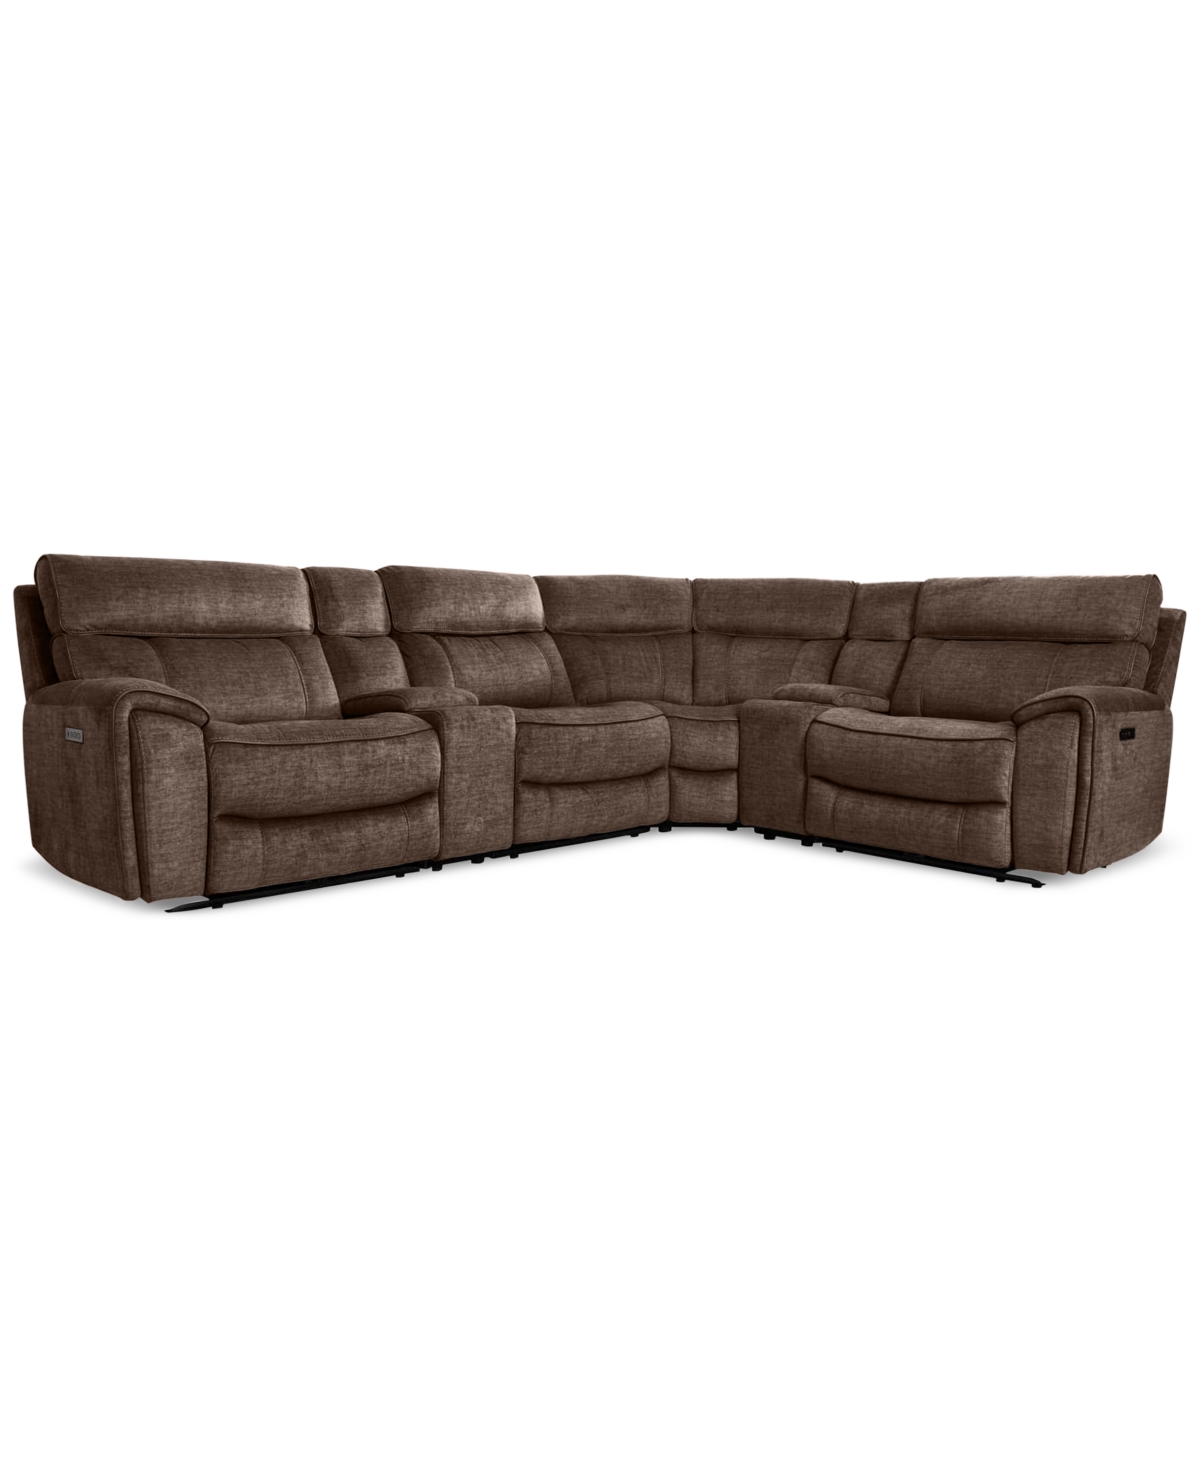 Furniture Hutchenson 6pc Fabric Sectional With 2 Usb Power Recliners, 2 Consoles In Chocolate Brown